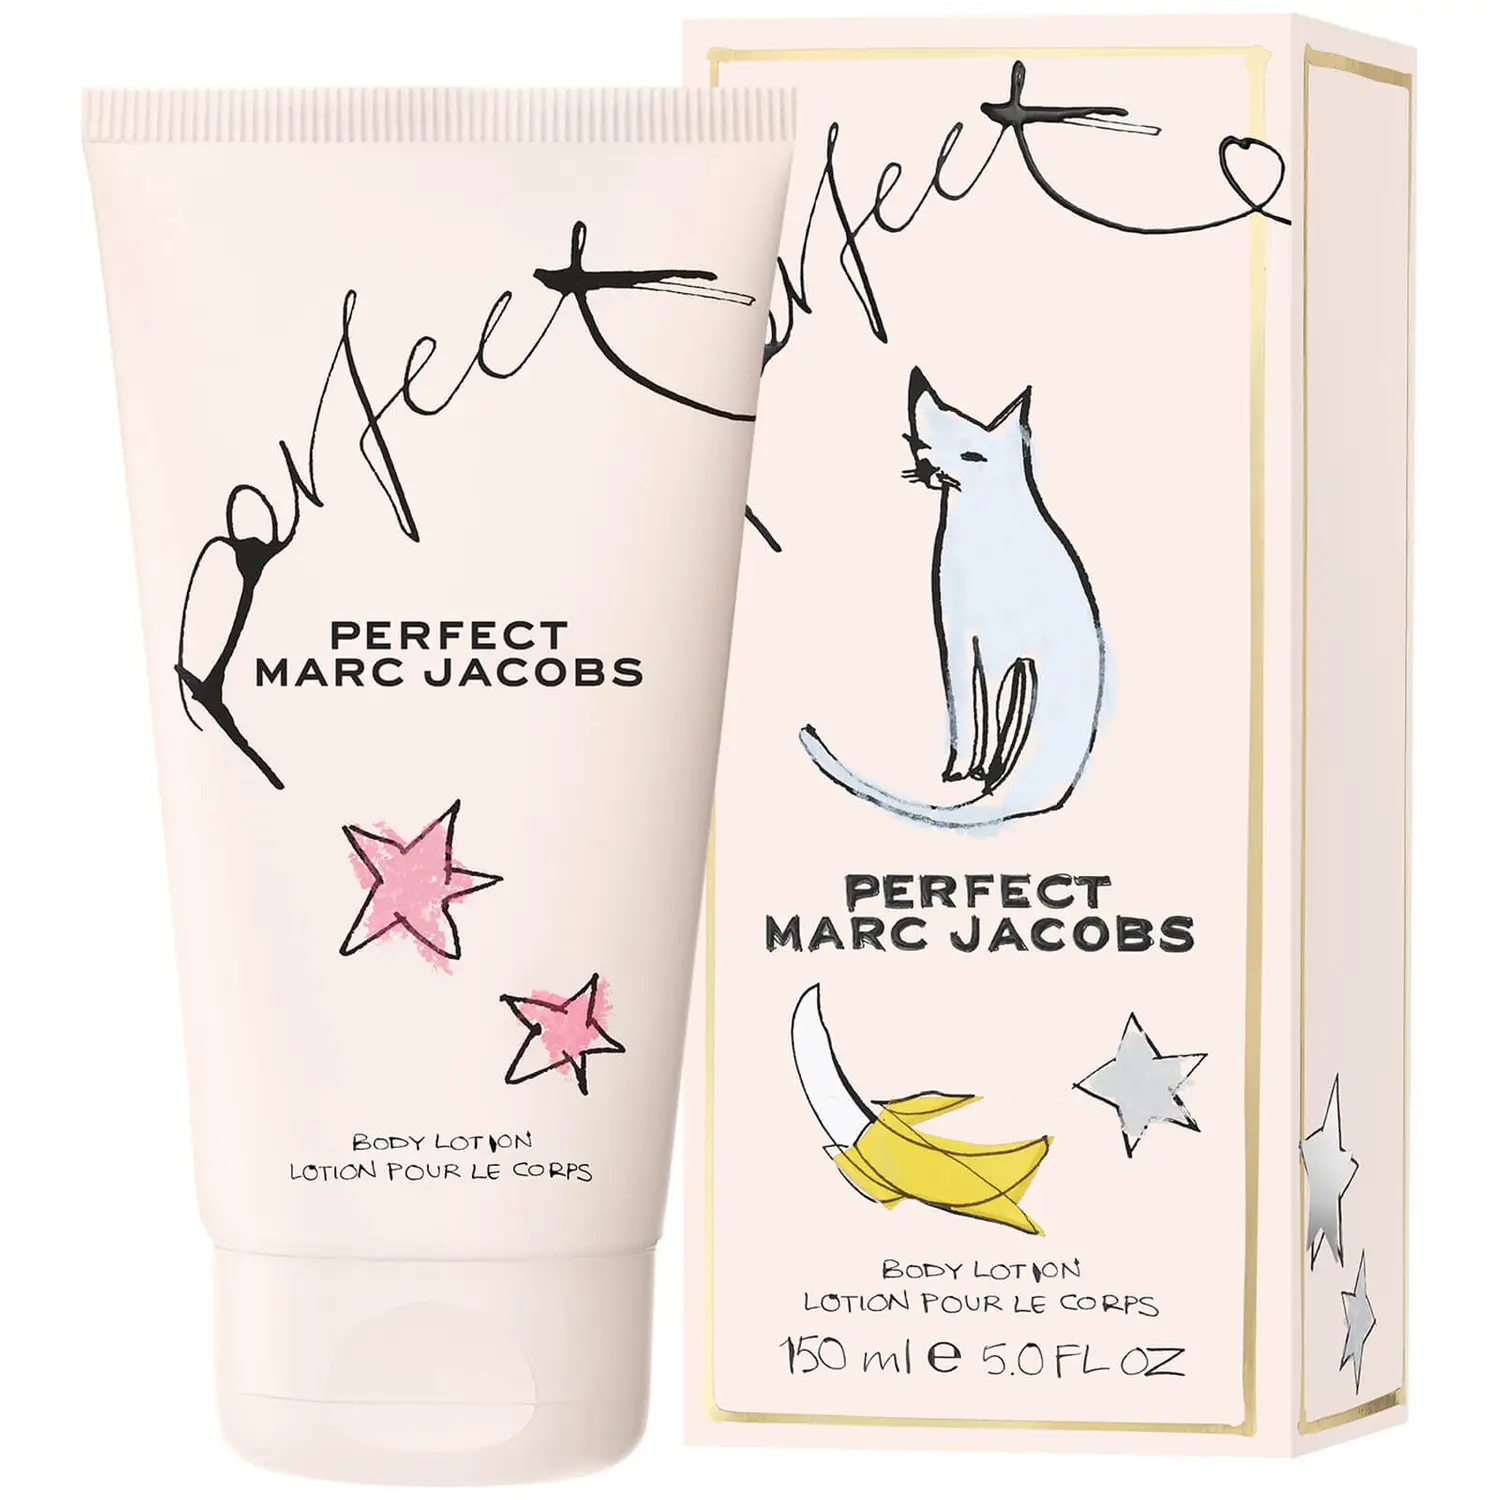 Body Lotion und Creme Marc Jacobs Perfect Body Lotion 150ml kaufen